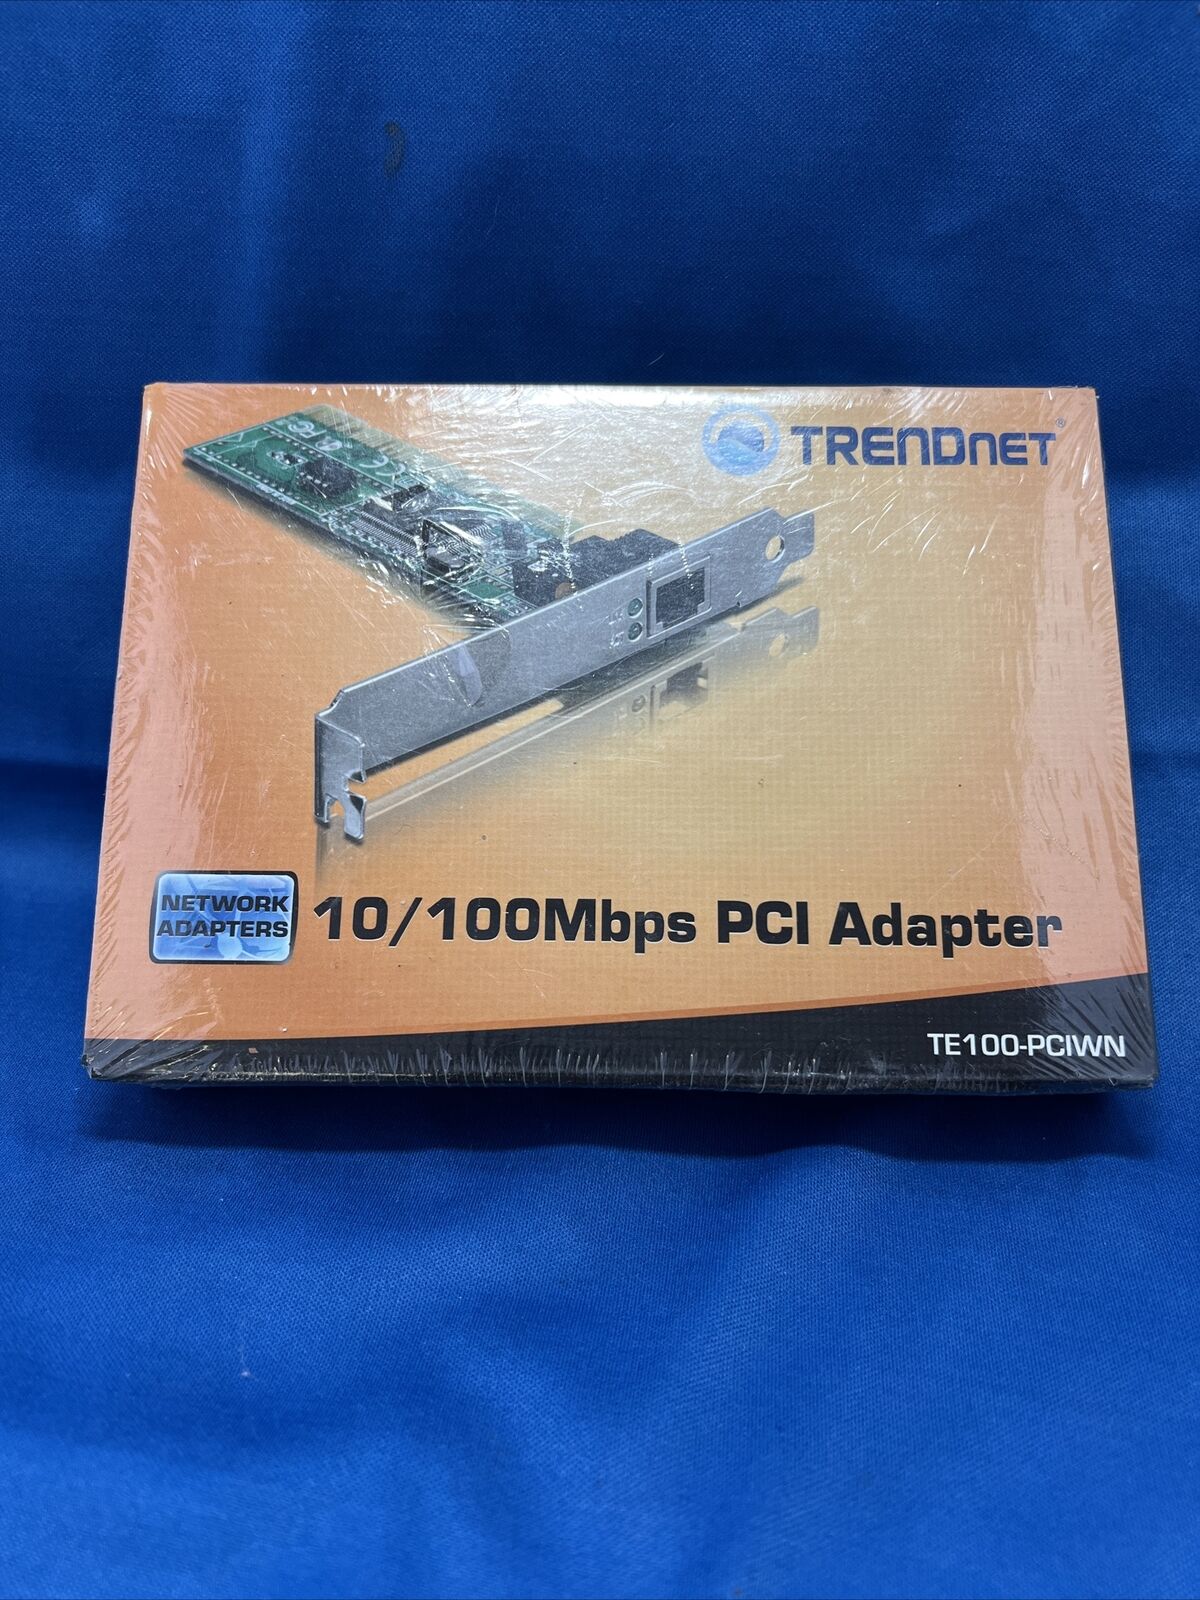 Trendnet TE100-PCIWN 10/100Mbps PCI Adapter (New In The Box)